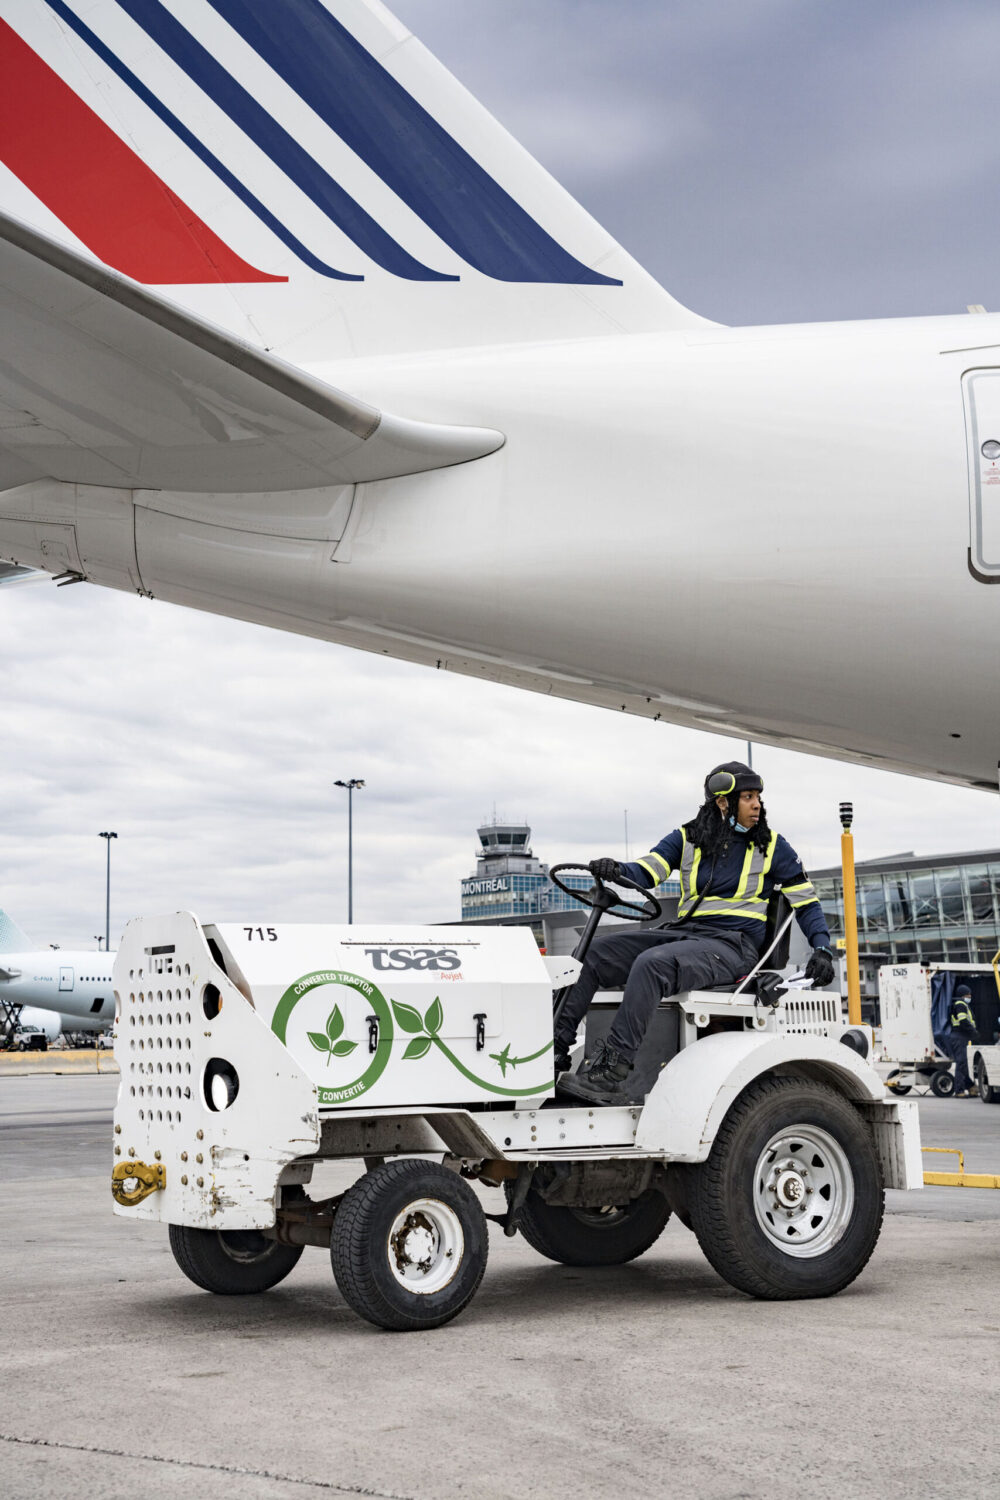 Air France: solutions for sustainable tourism